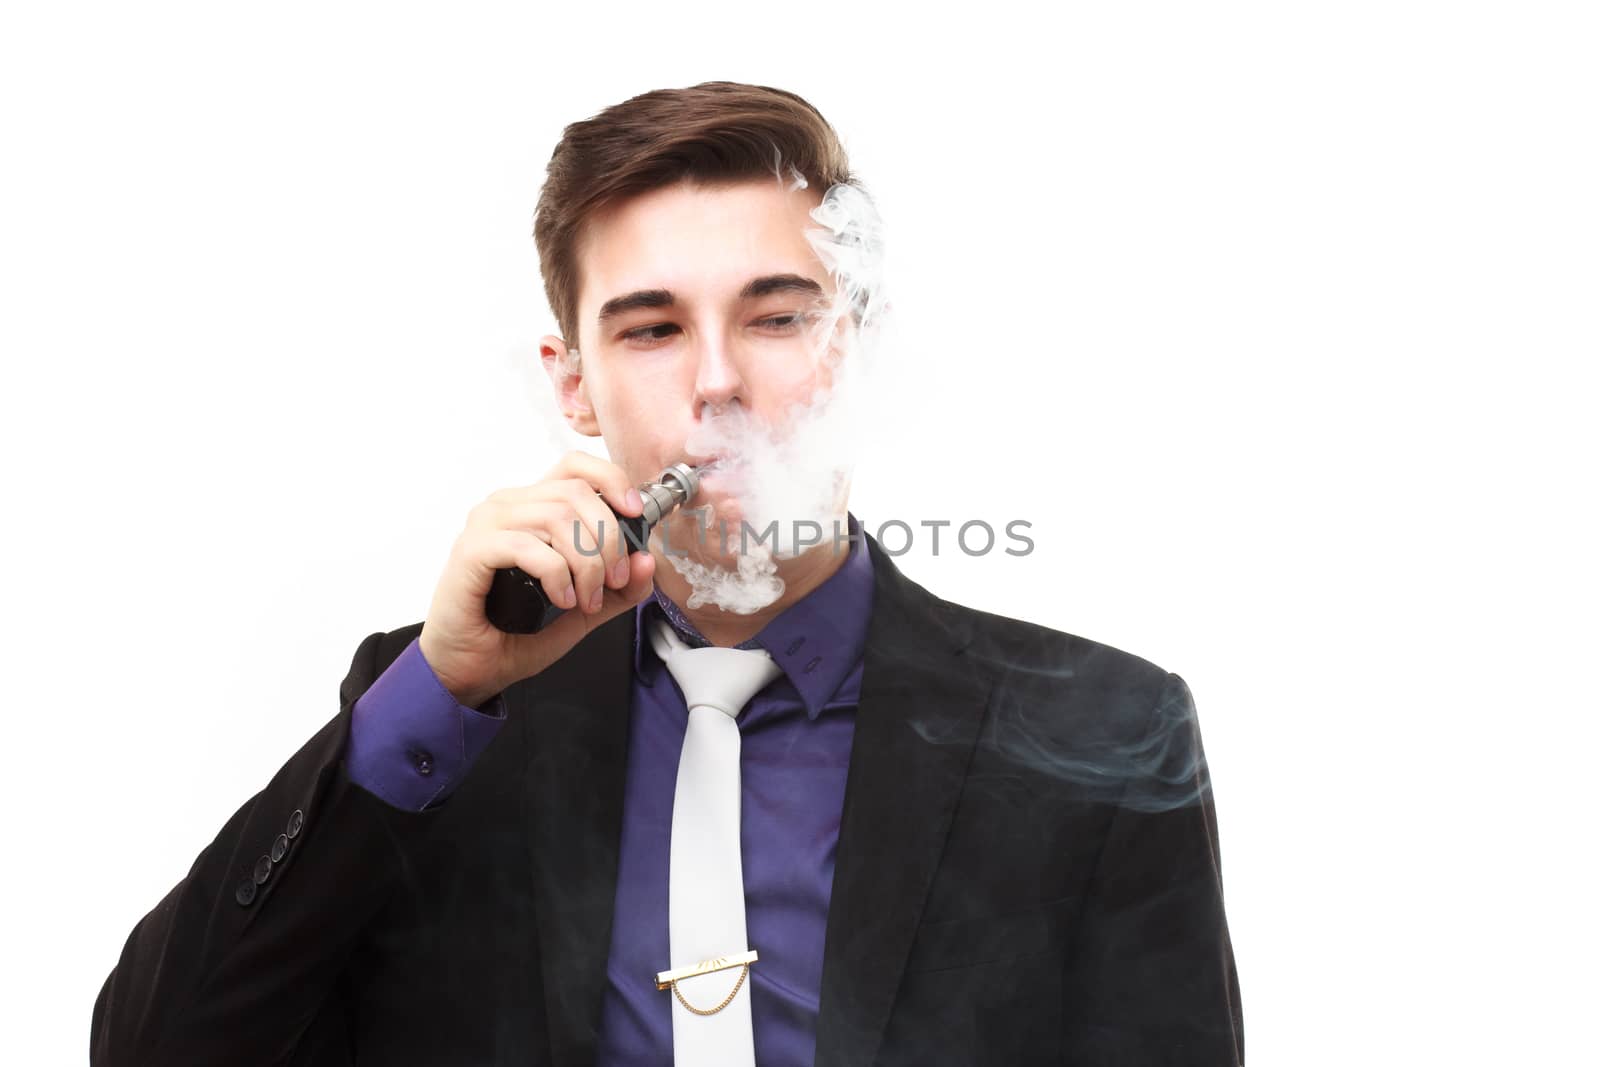 Portrait of a man in suit smoking an e-cigarette isolated on whi by DmitryOsipov